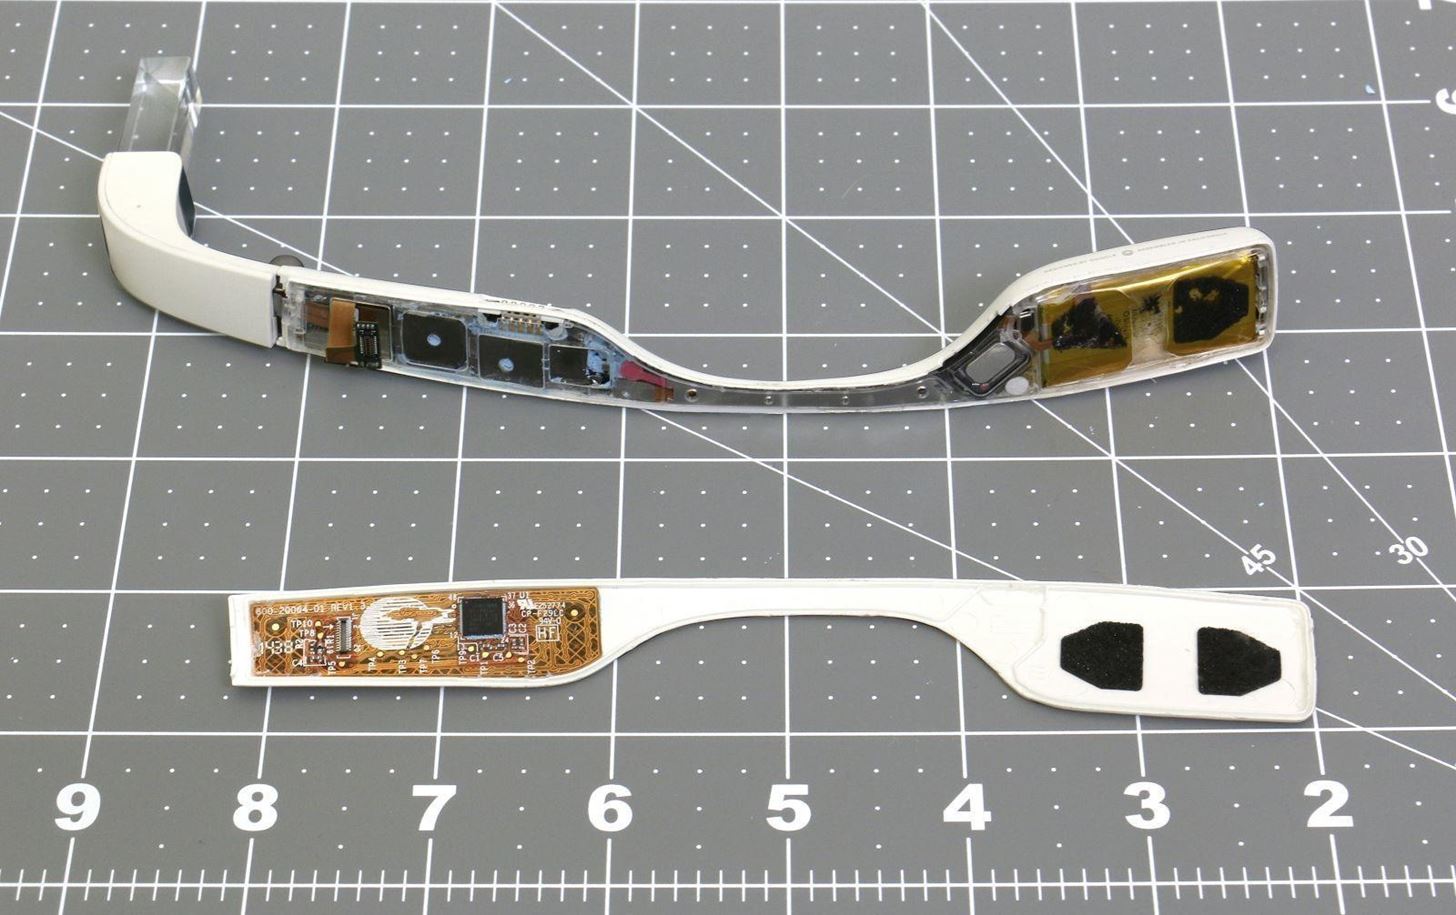 Images Surface of the New Google Glass